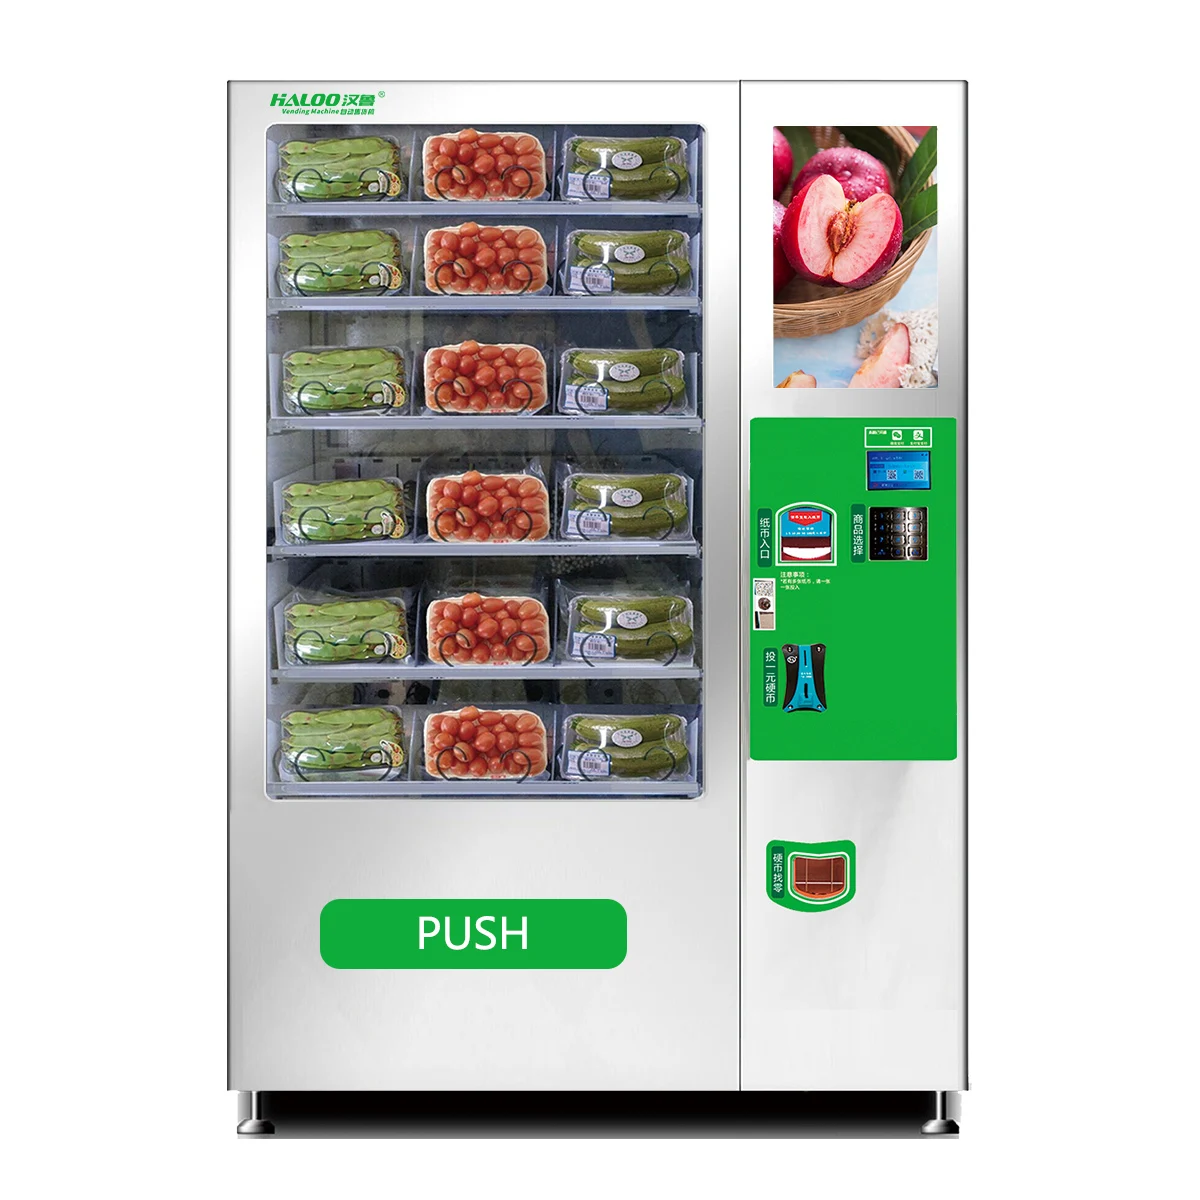 G-wallet mobile pay drink and snack vending machine for Euro and USA